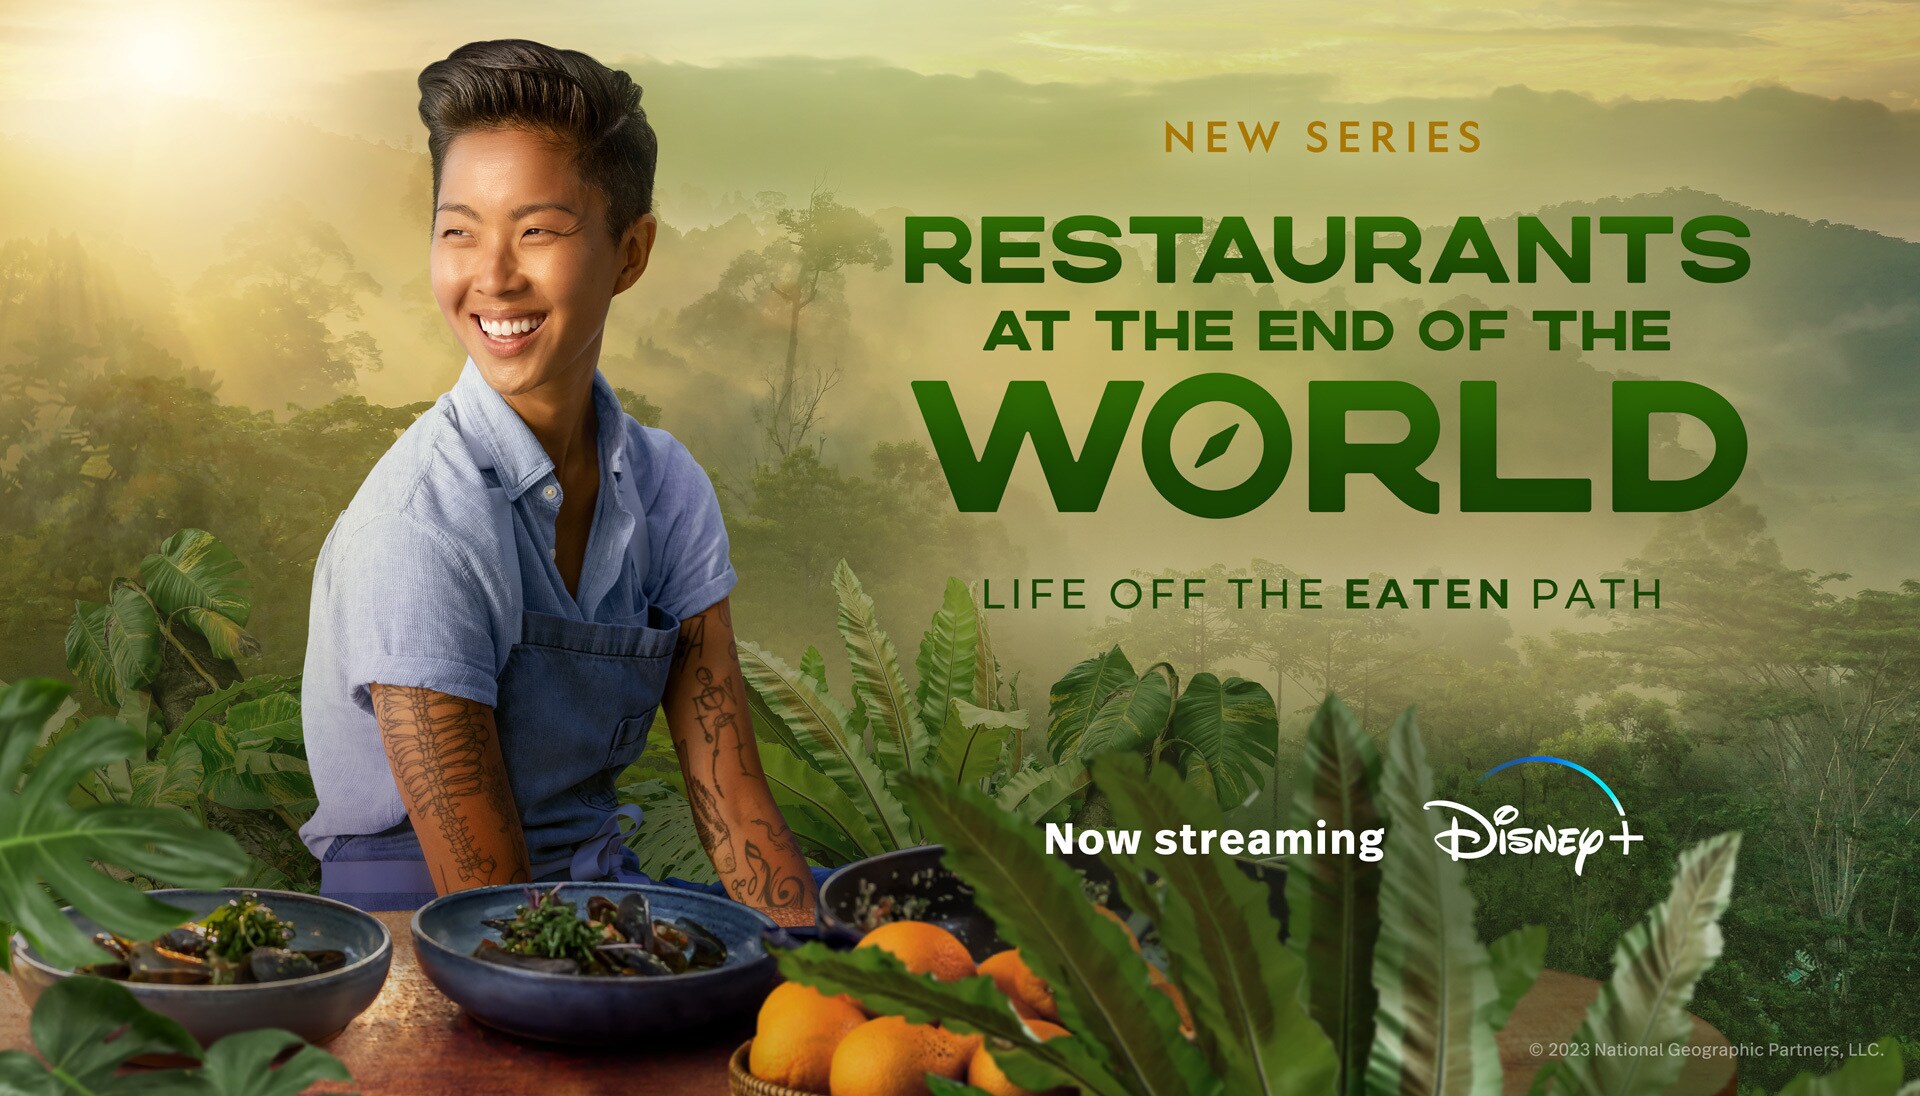 Chef Kristen Kish sits in a field with dishes in front of her on the poster for Restaurants at the End of the World